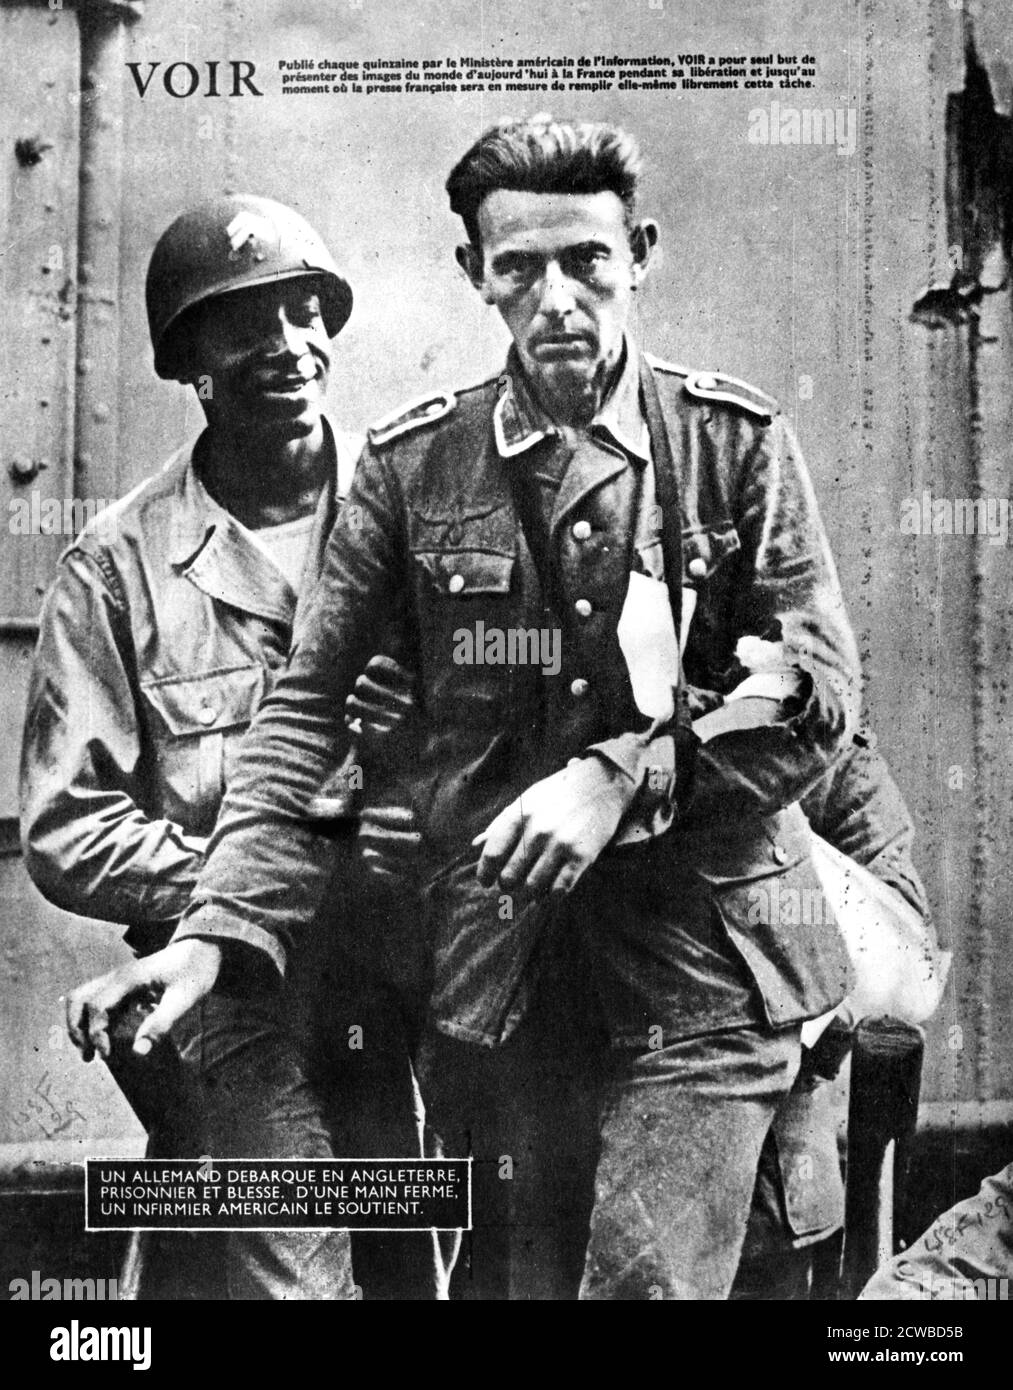 German prisoner of war arriving in England, escorted by an American soldier, 1944. Photograph from Voir magazine an American French language publication. The photographer is unknown. Stock Photo